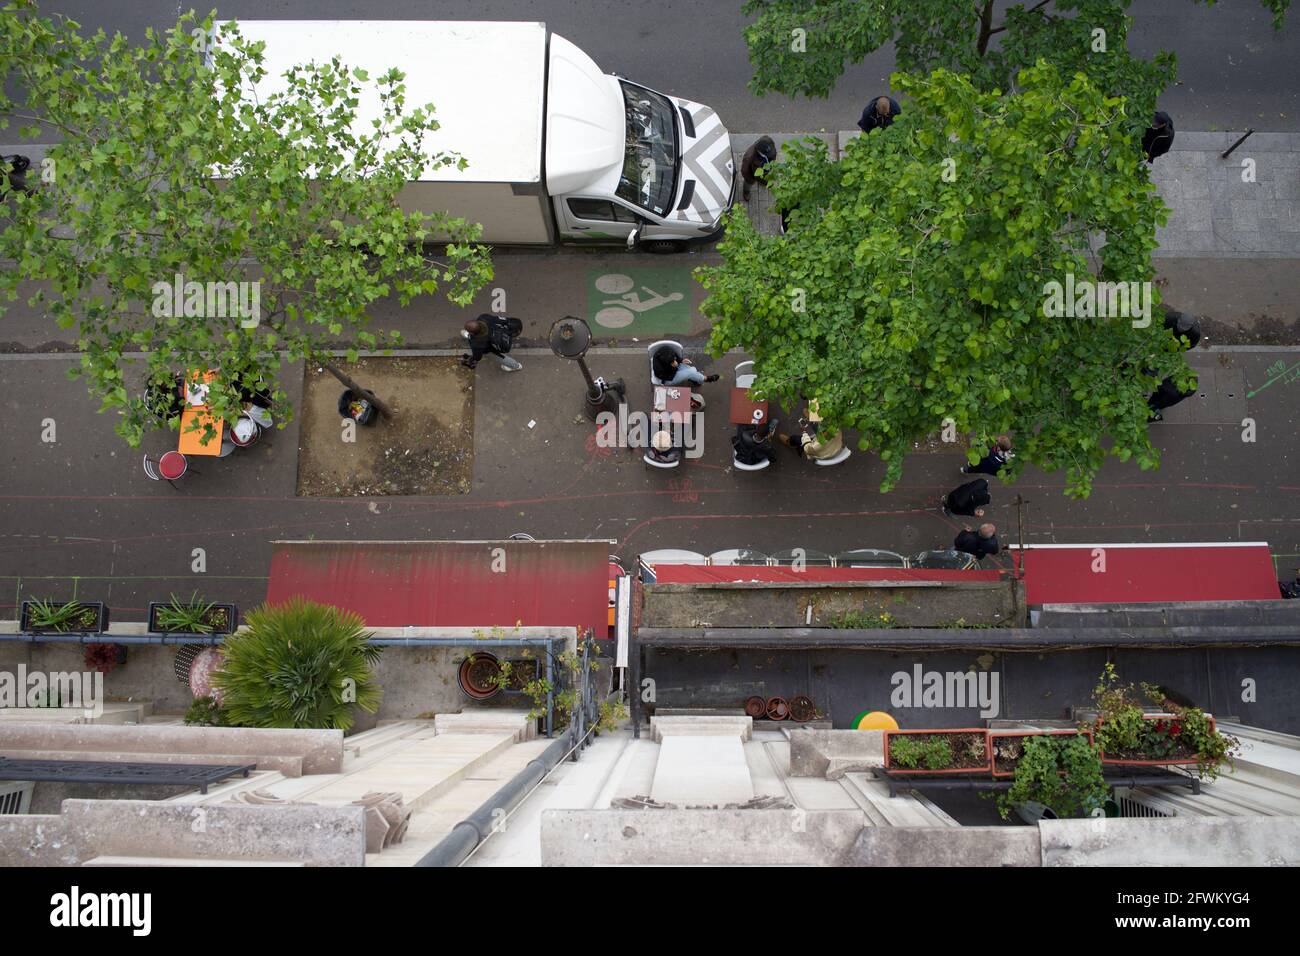 View from a boulevard balcony of Parisians as they sit on a temporary cafe terrace, one of many to be found on Paris' pavements enabling customers to drink outside after Covid-19 lockdown restrictions are eased - Boulevard Barbès, Paris, France - May 2021 Stock Photo